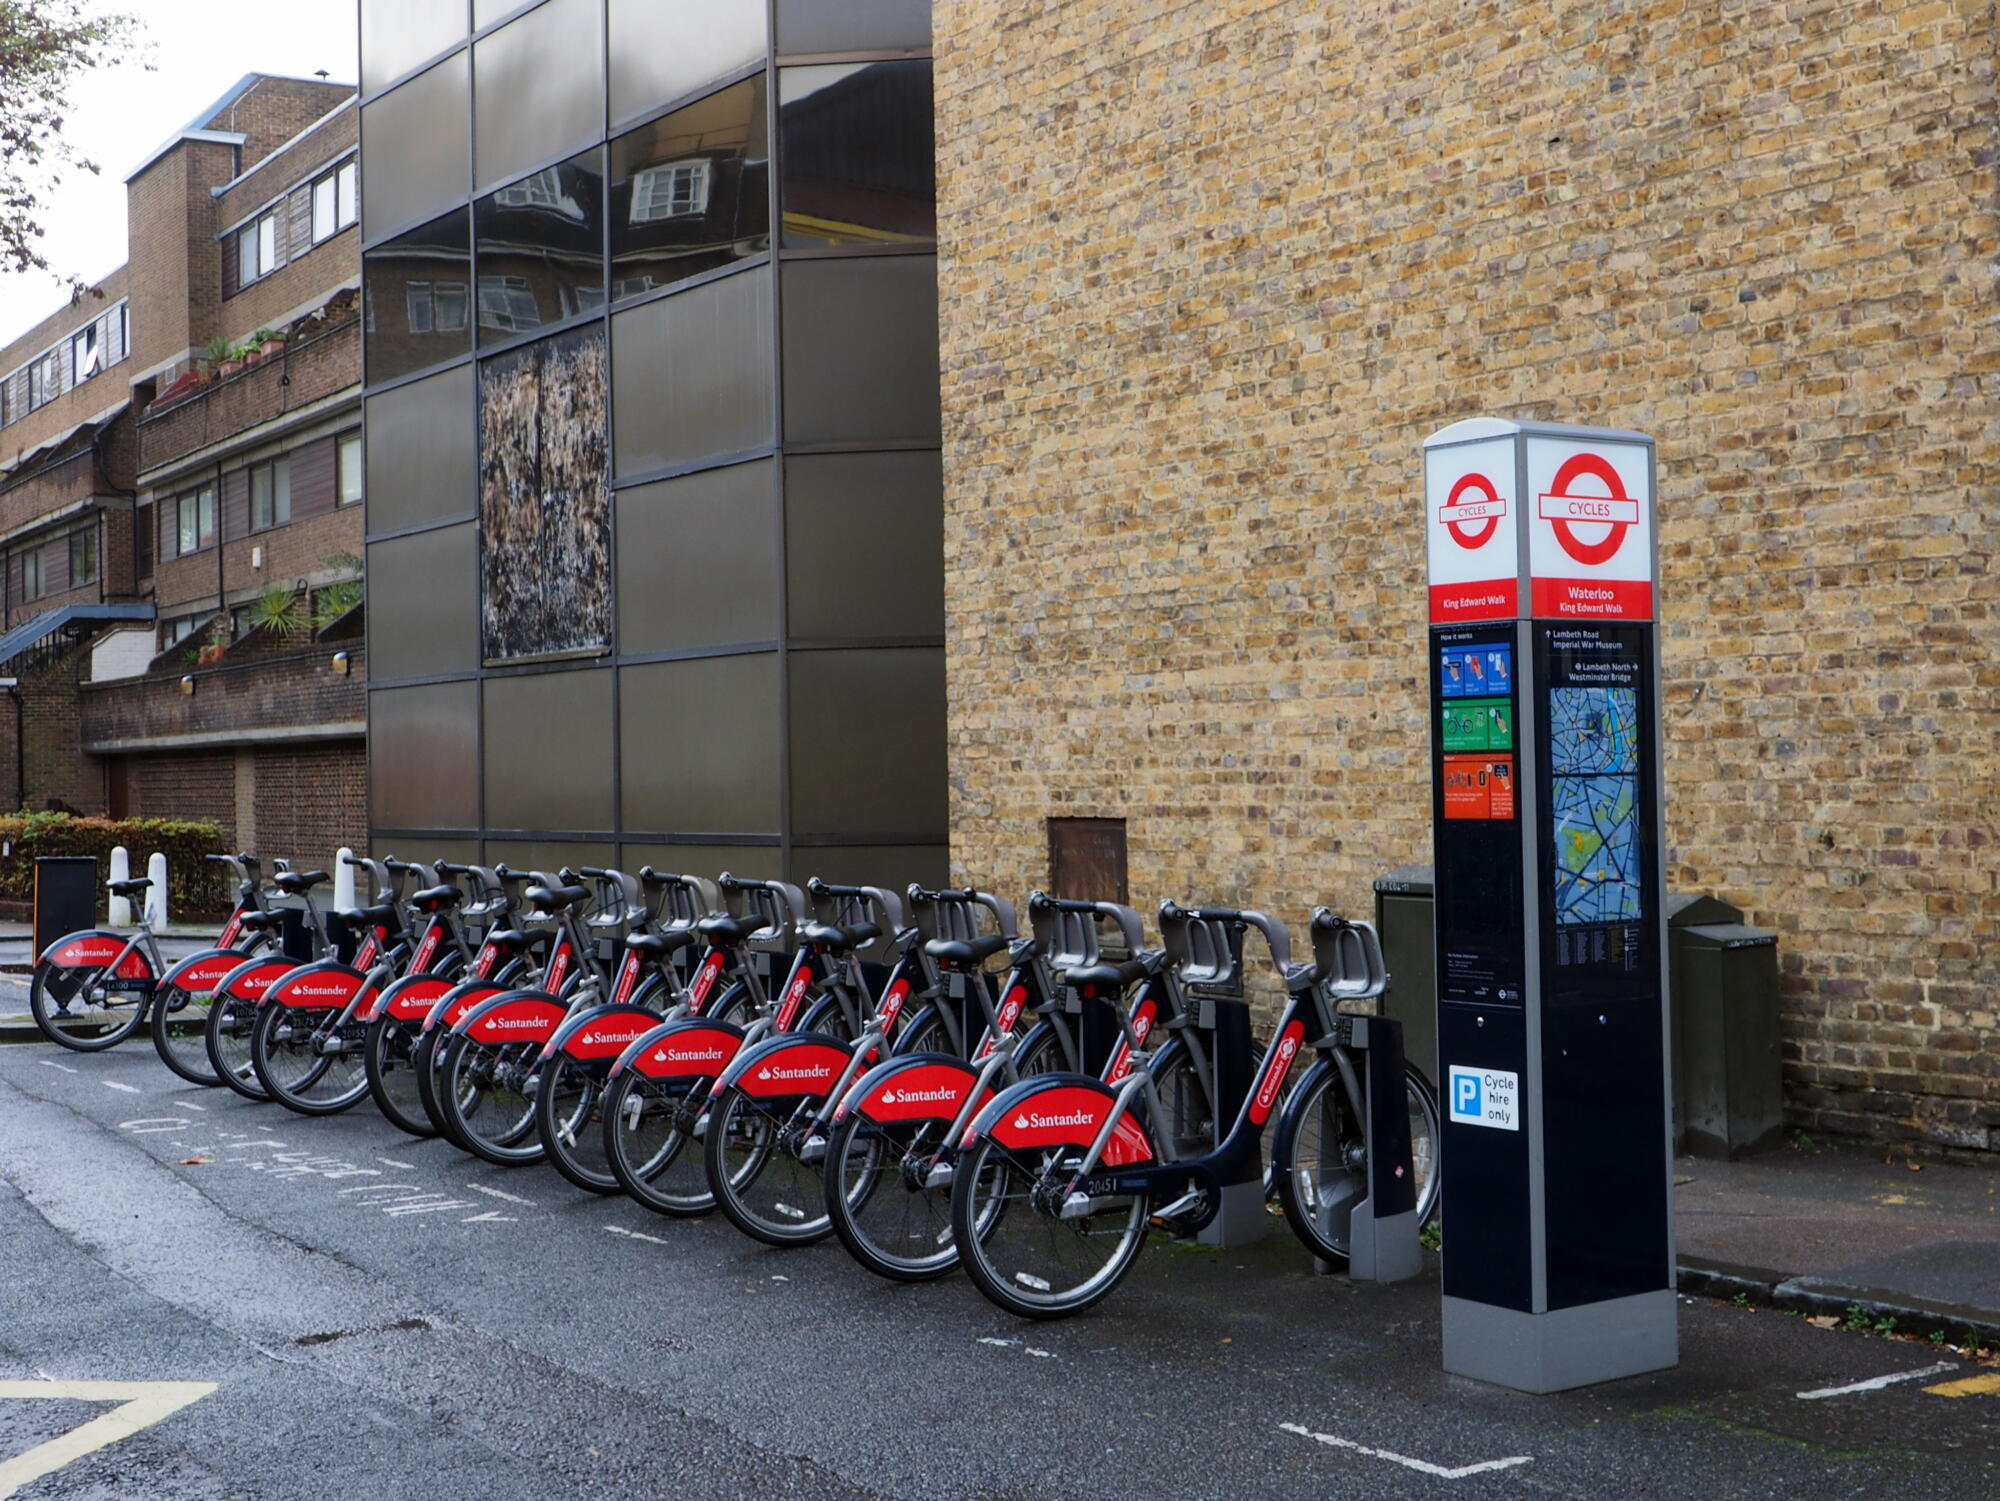 TfL to add e-bikes to shared cycle scheme